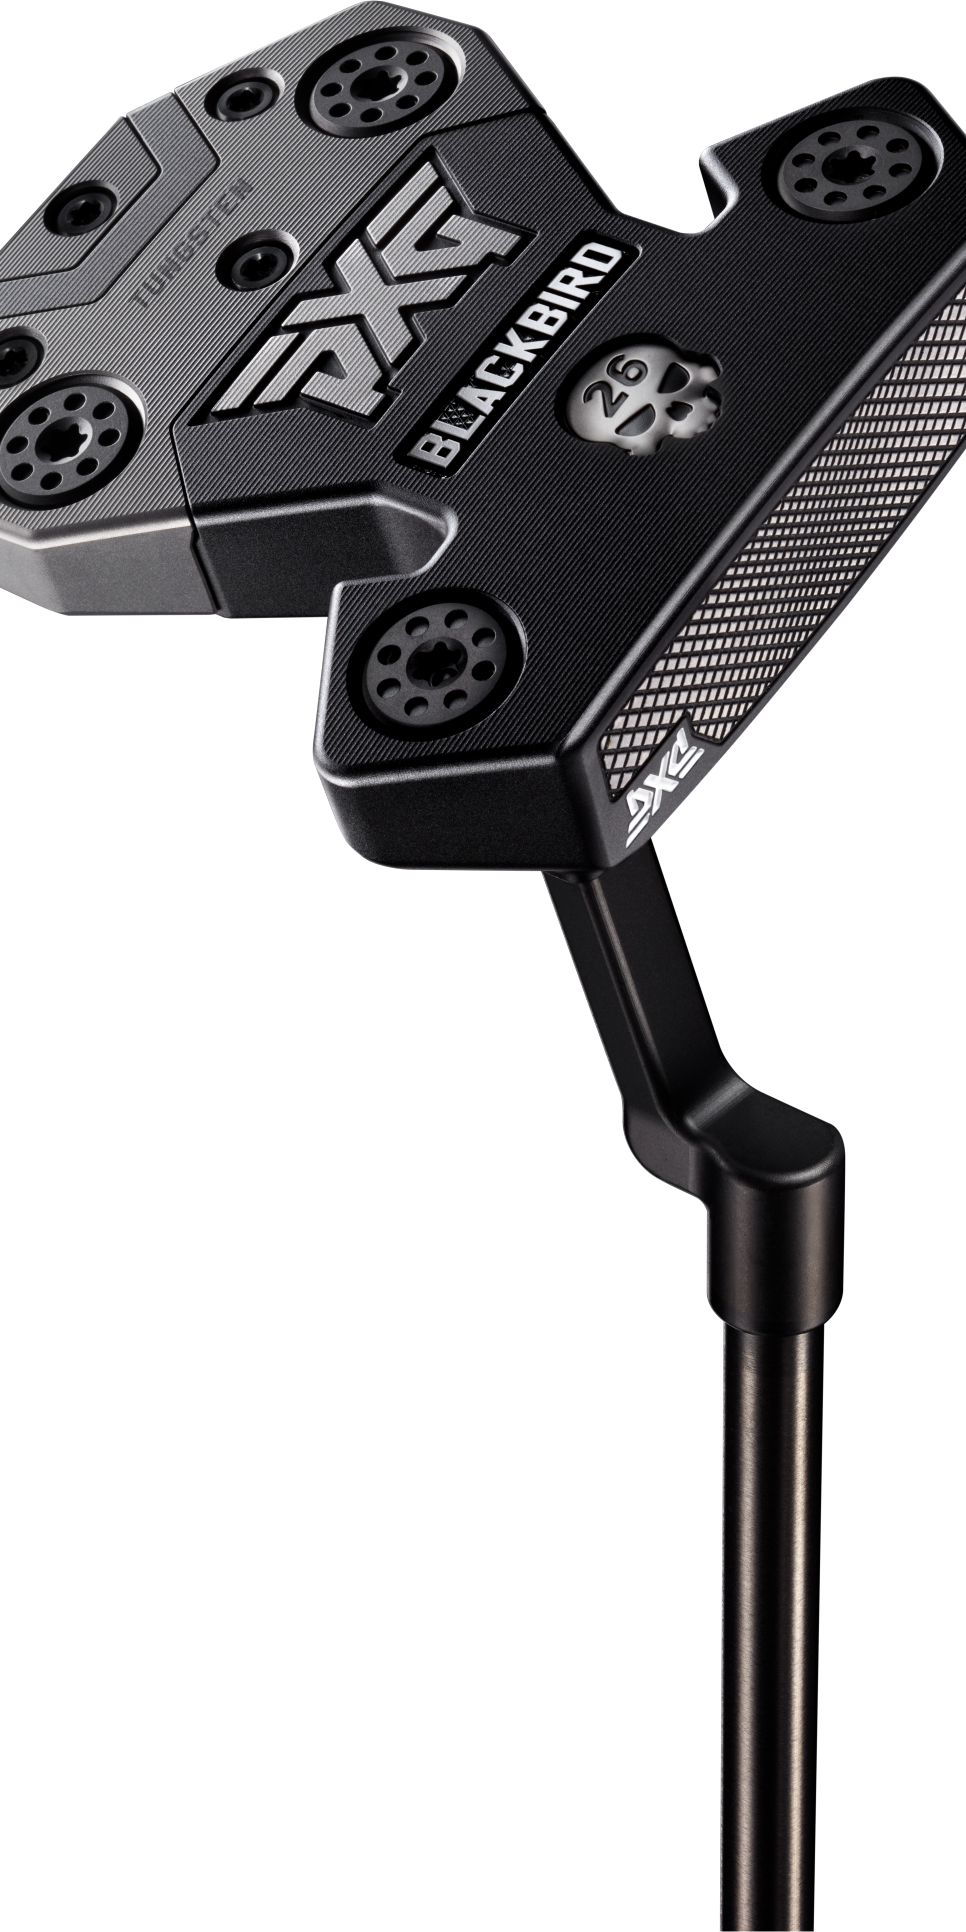 PXG adds two putters to its Battle Ready line. They're affordable